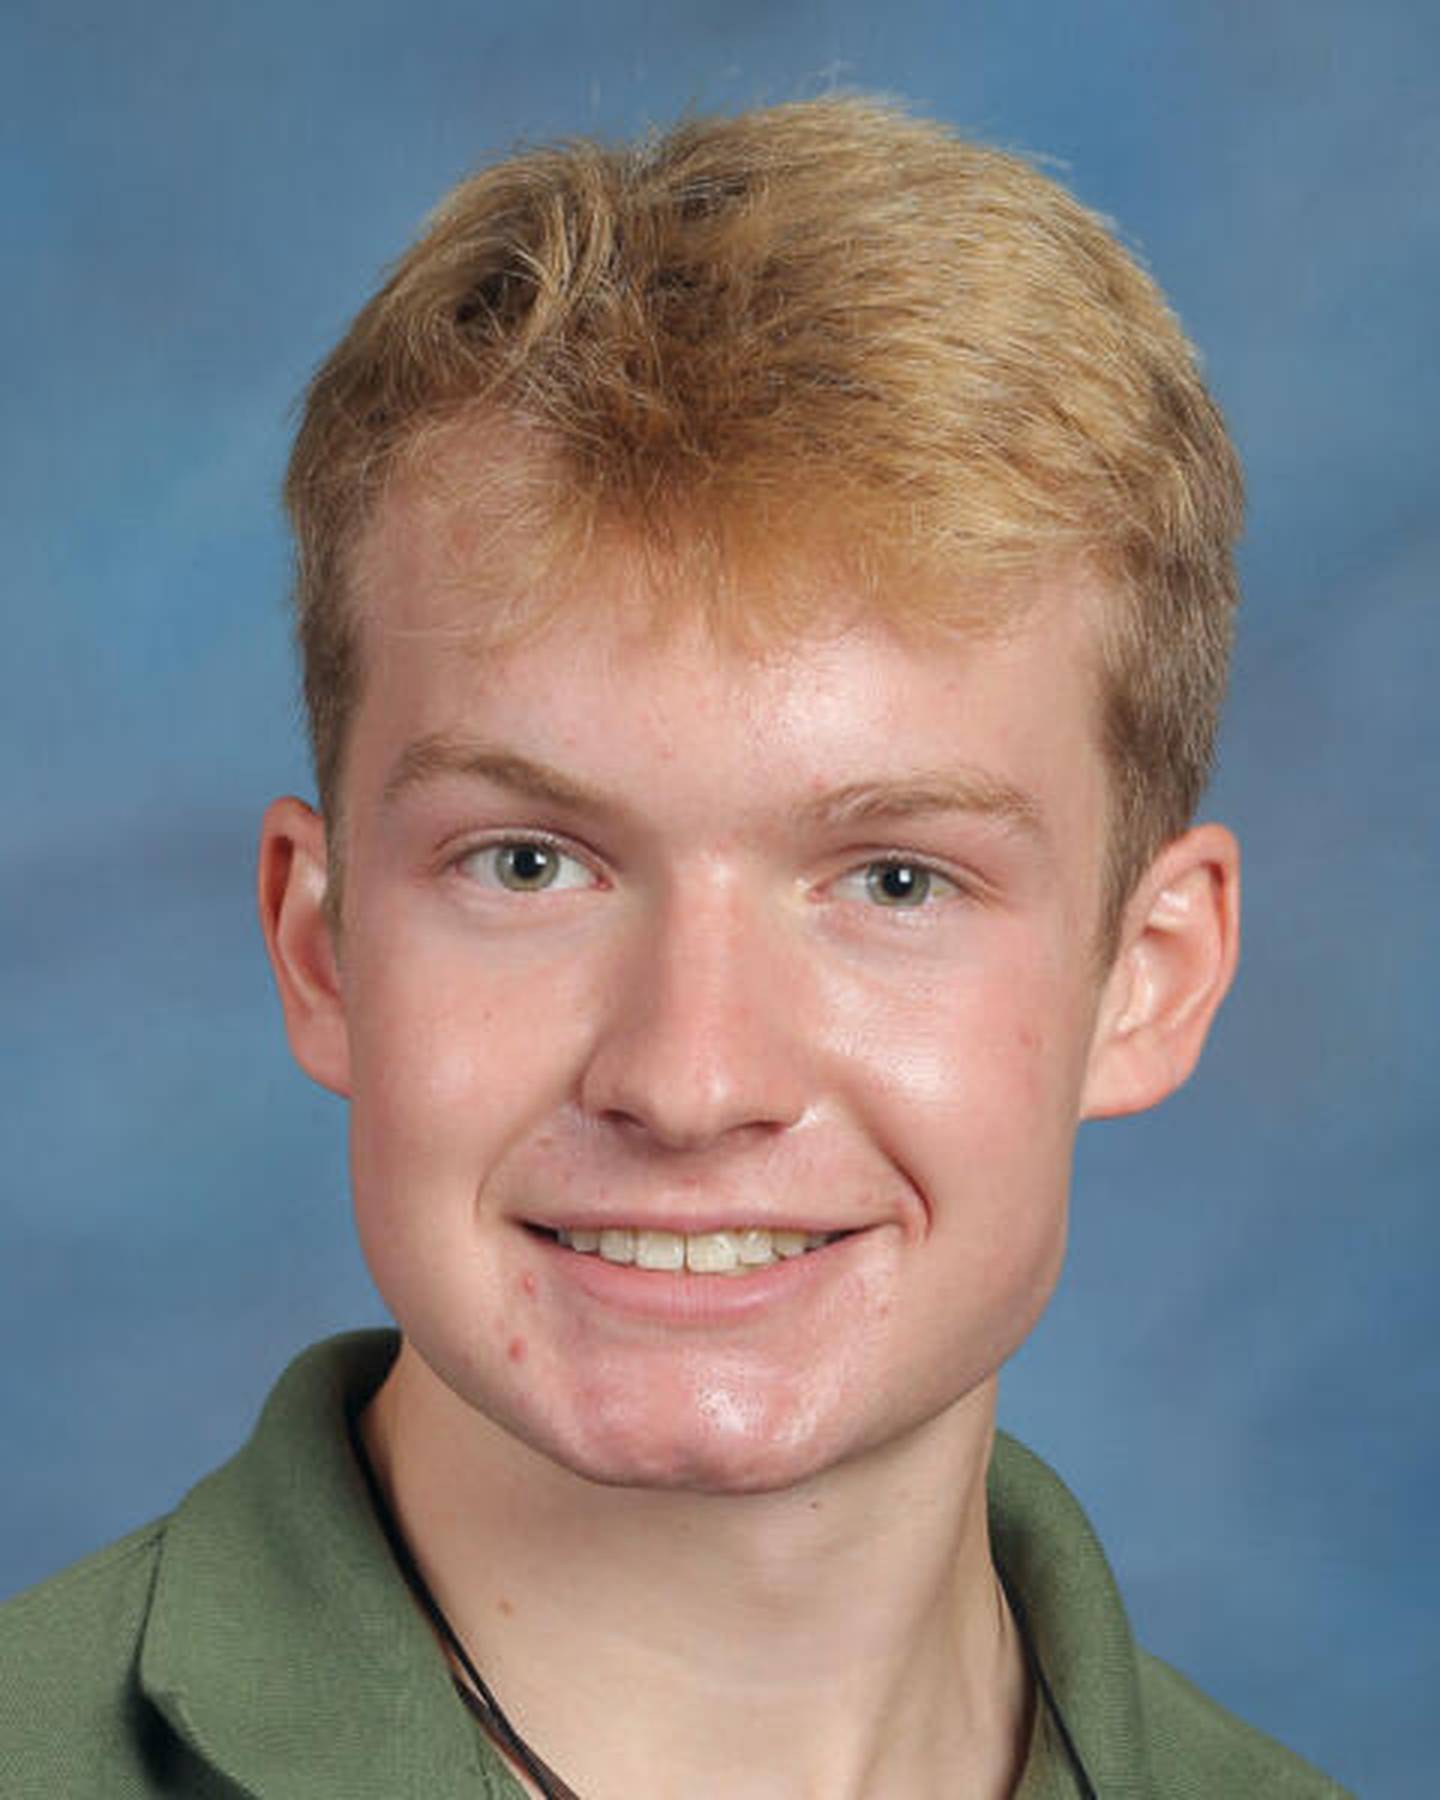 Joliet Catholic Academy named Andrew Birsa as a Student of the Month for November 2021.